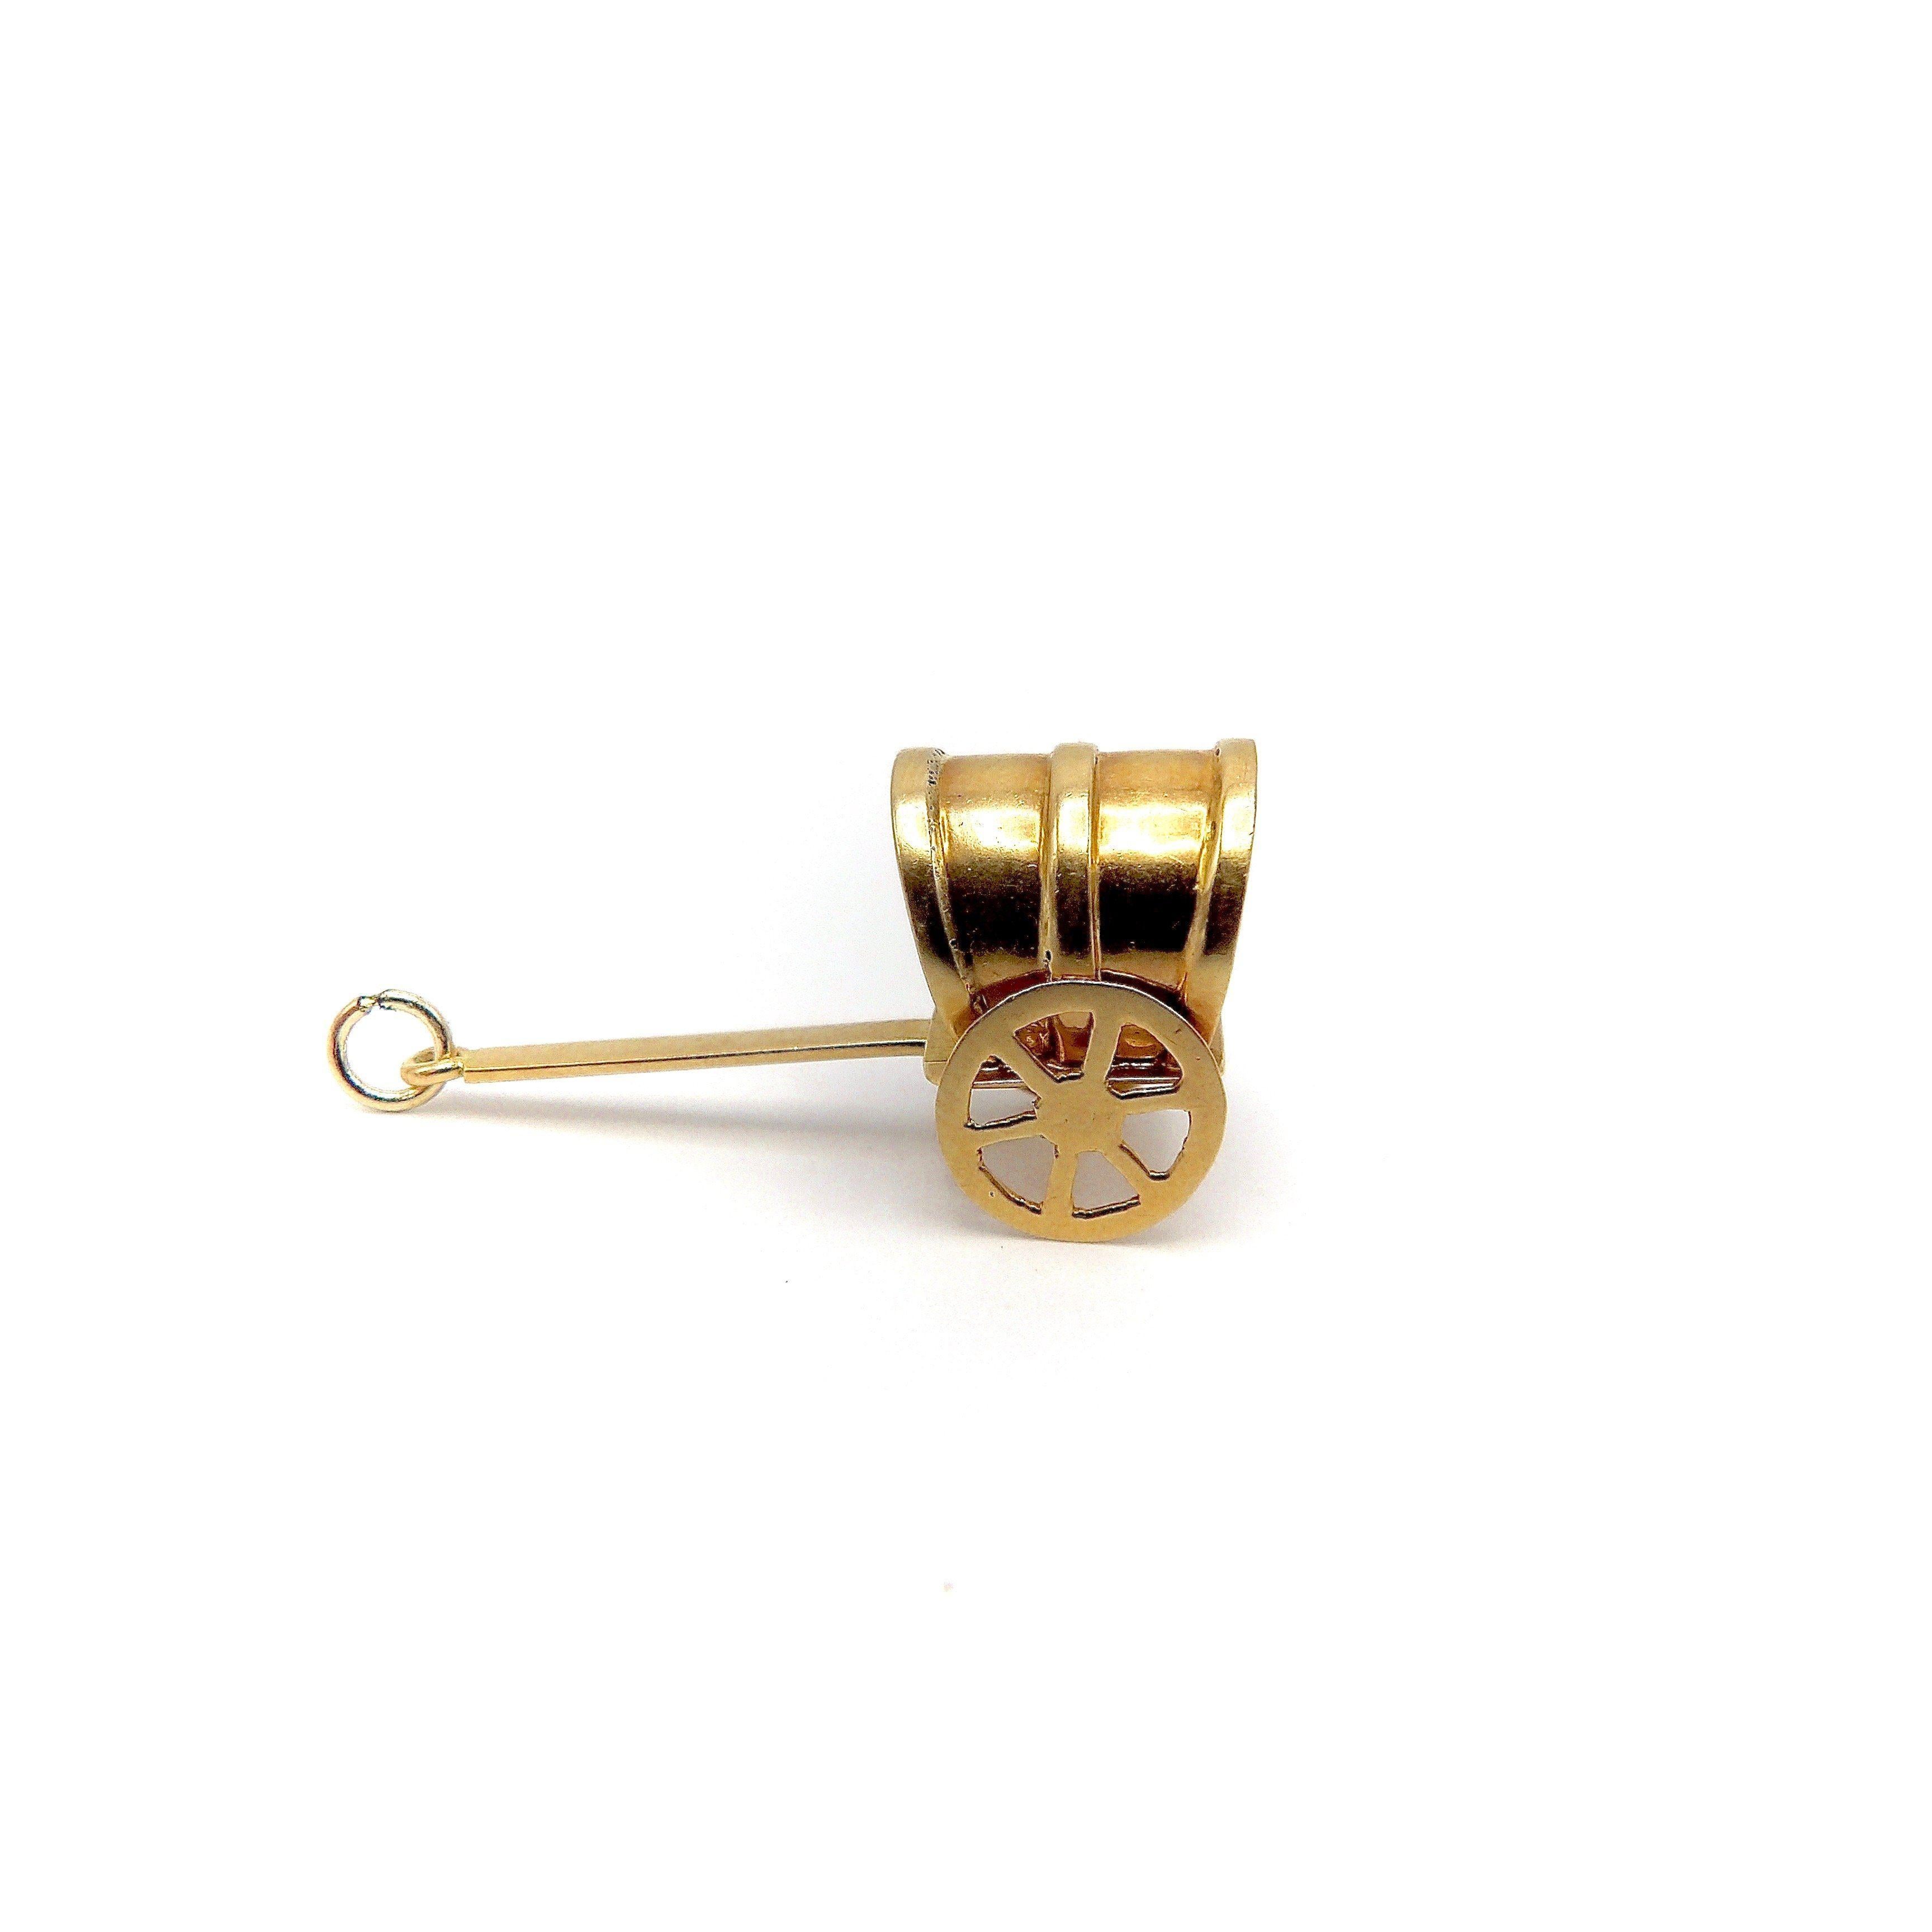 Contemporary 14k Gold Vintage American Covered Wagon Charm For Sale